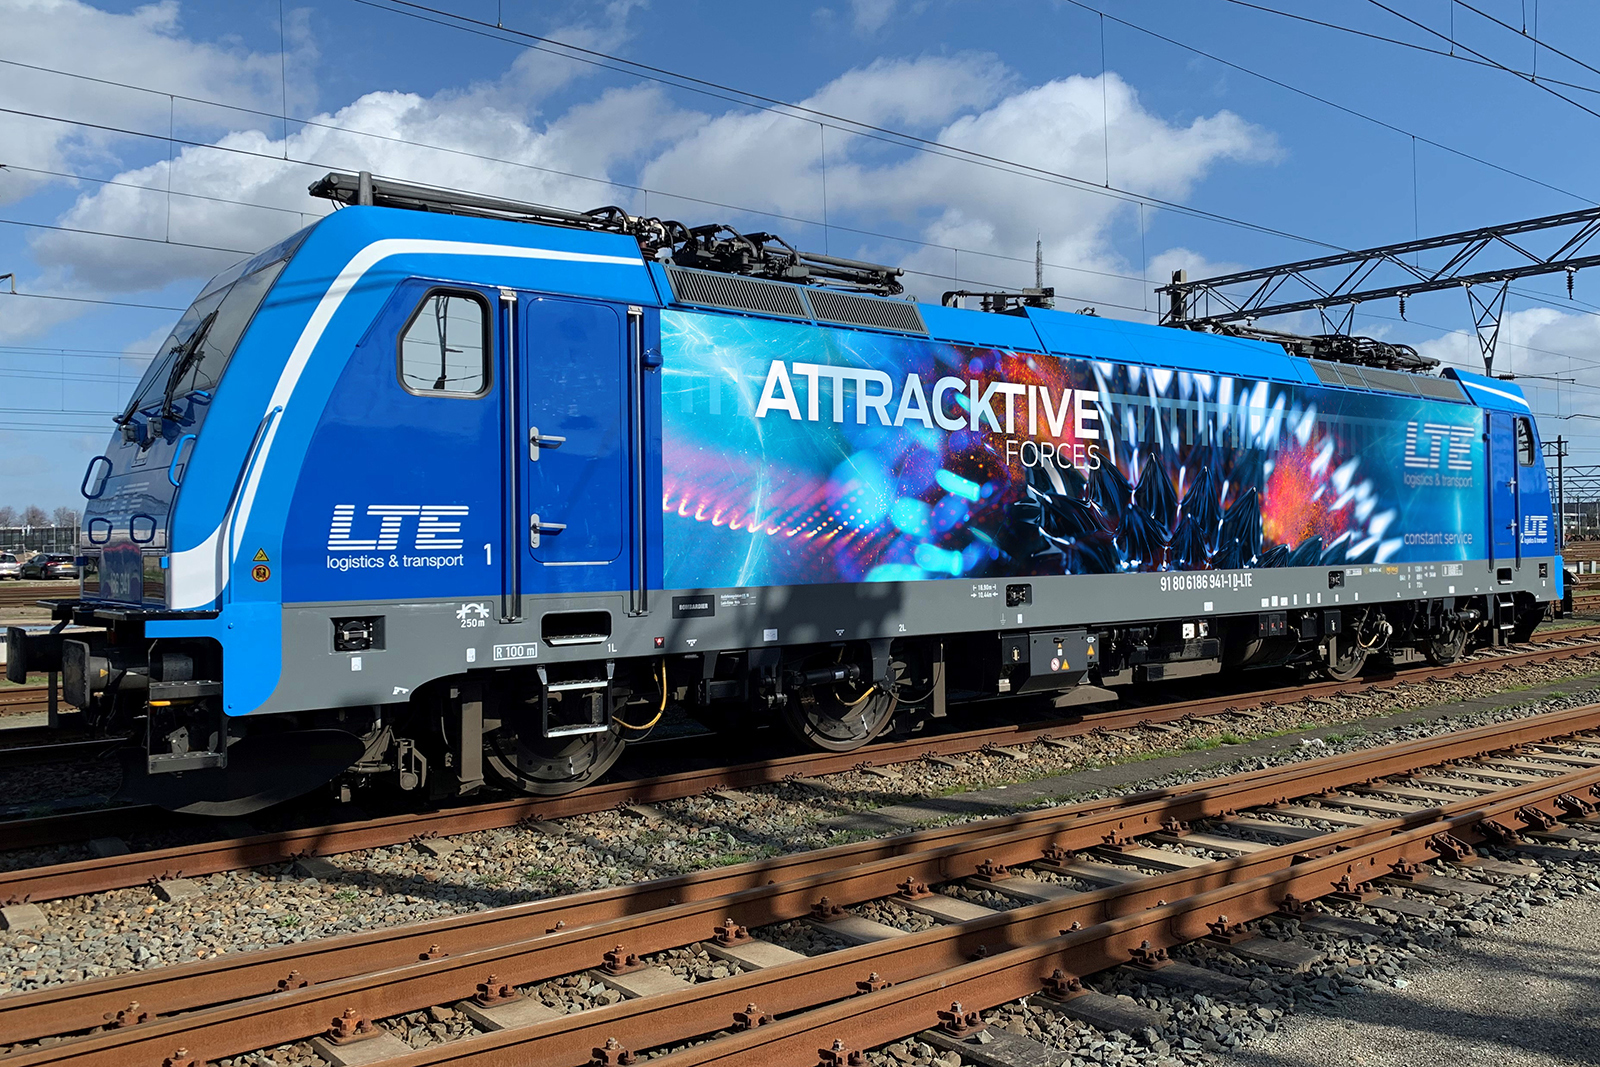 LTE Attracktive Forces